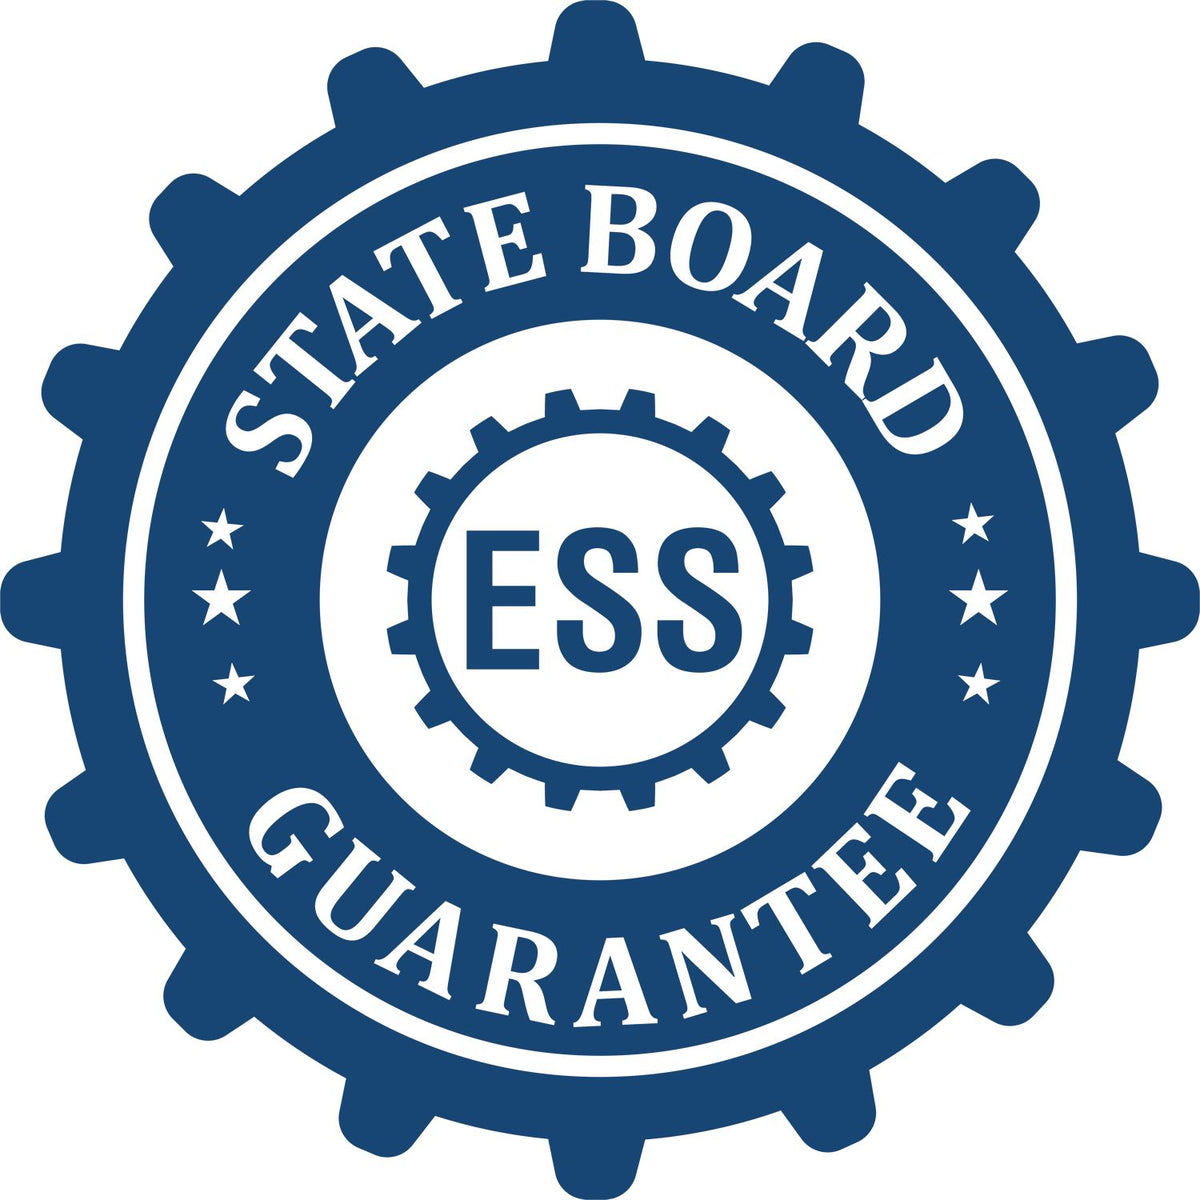 An emblem in a gear shape illustrating a state board guarantee for the Hybrid New Jersey Geologist Seal